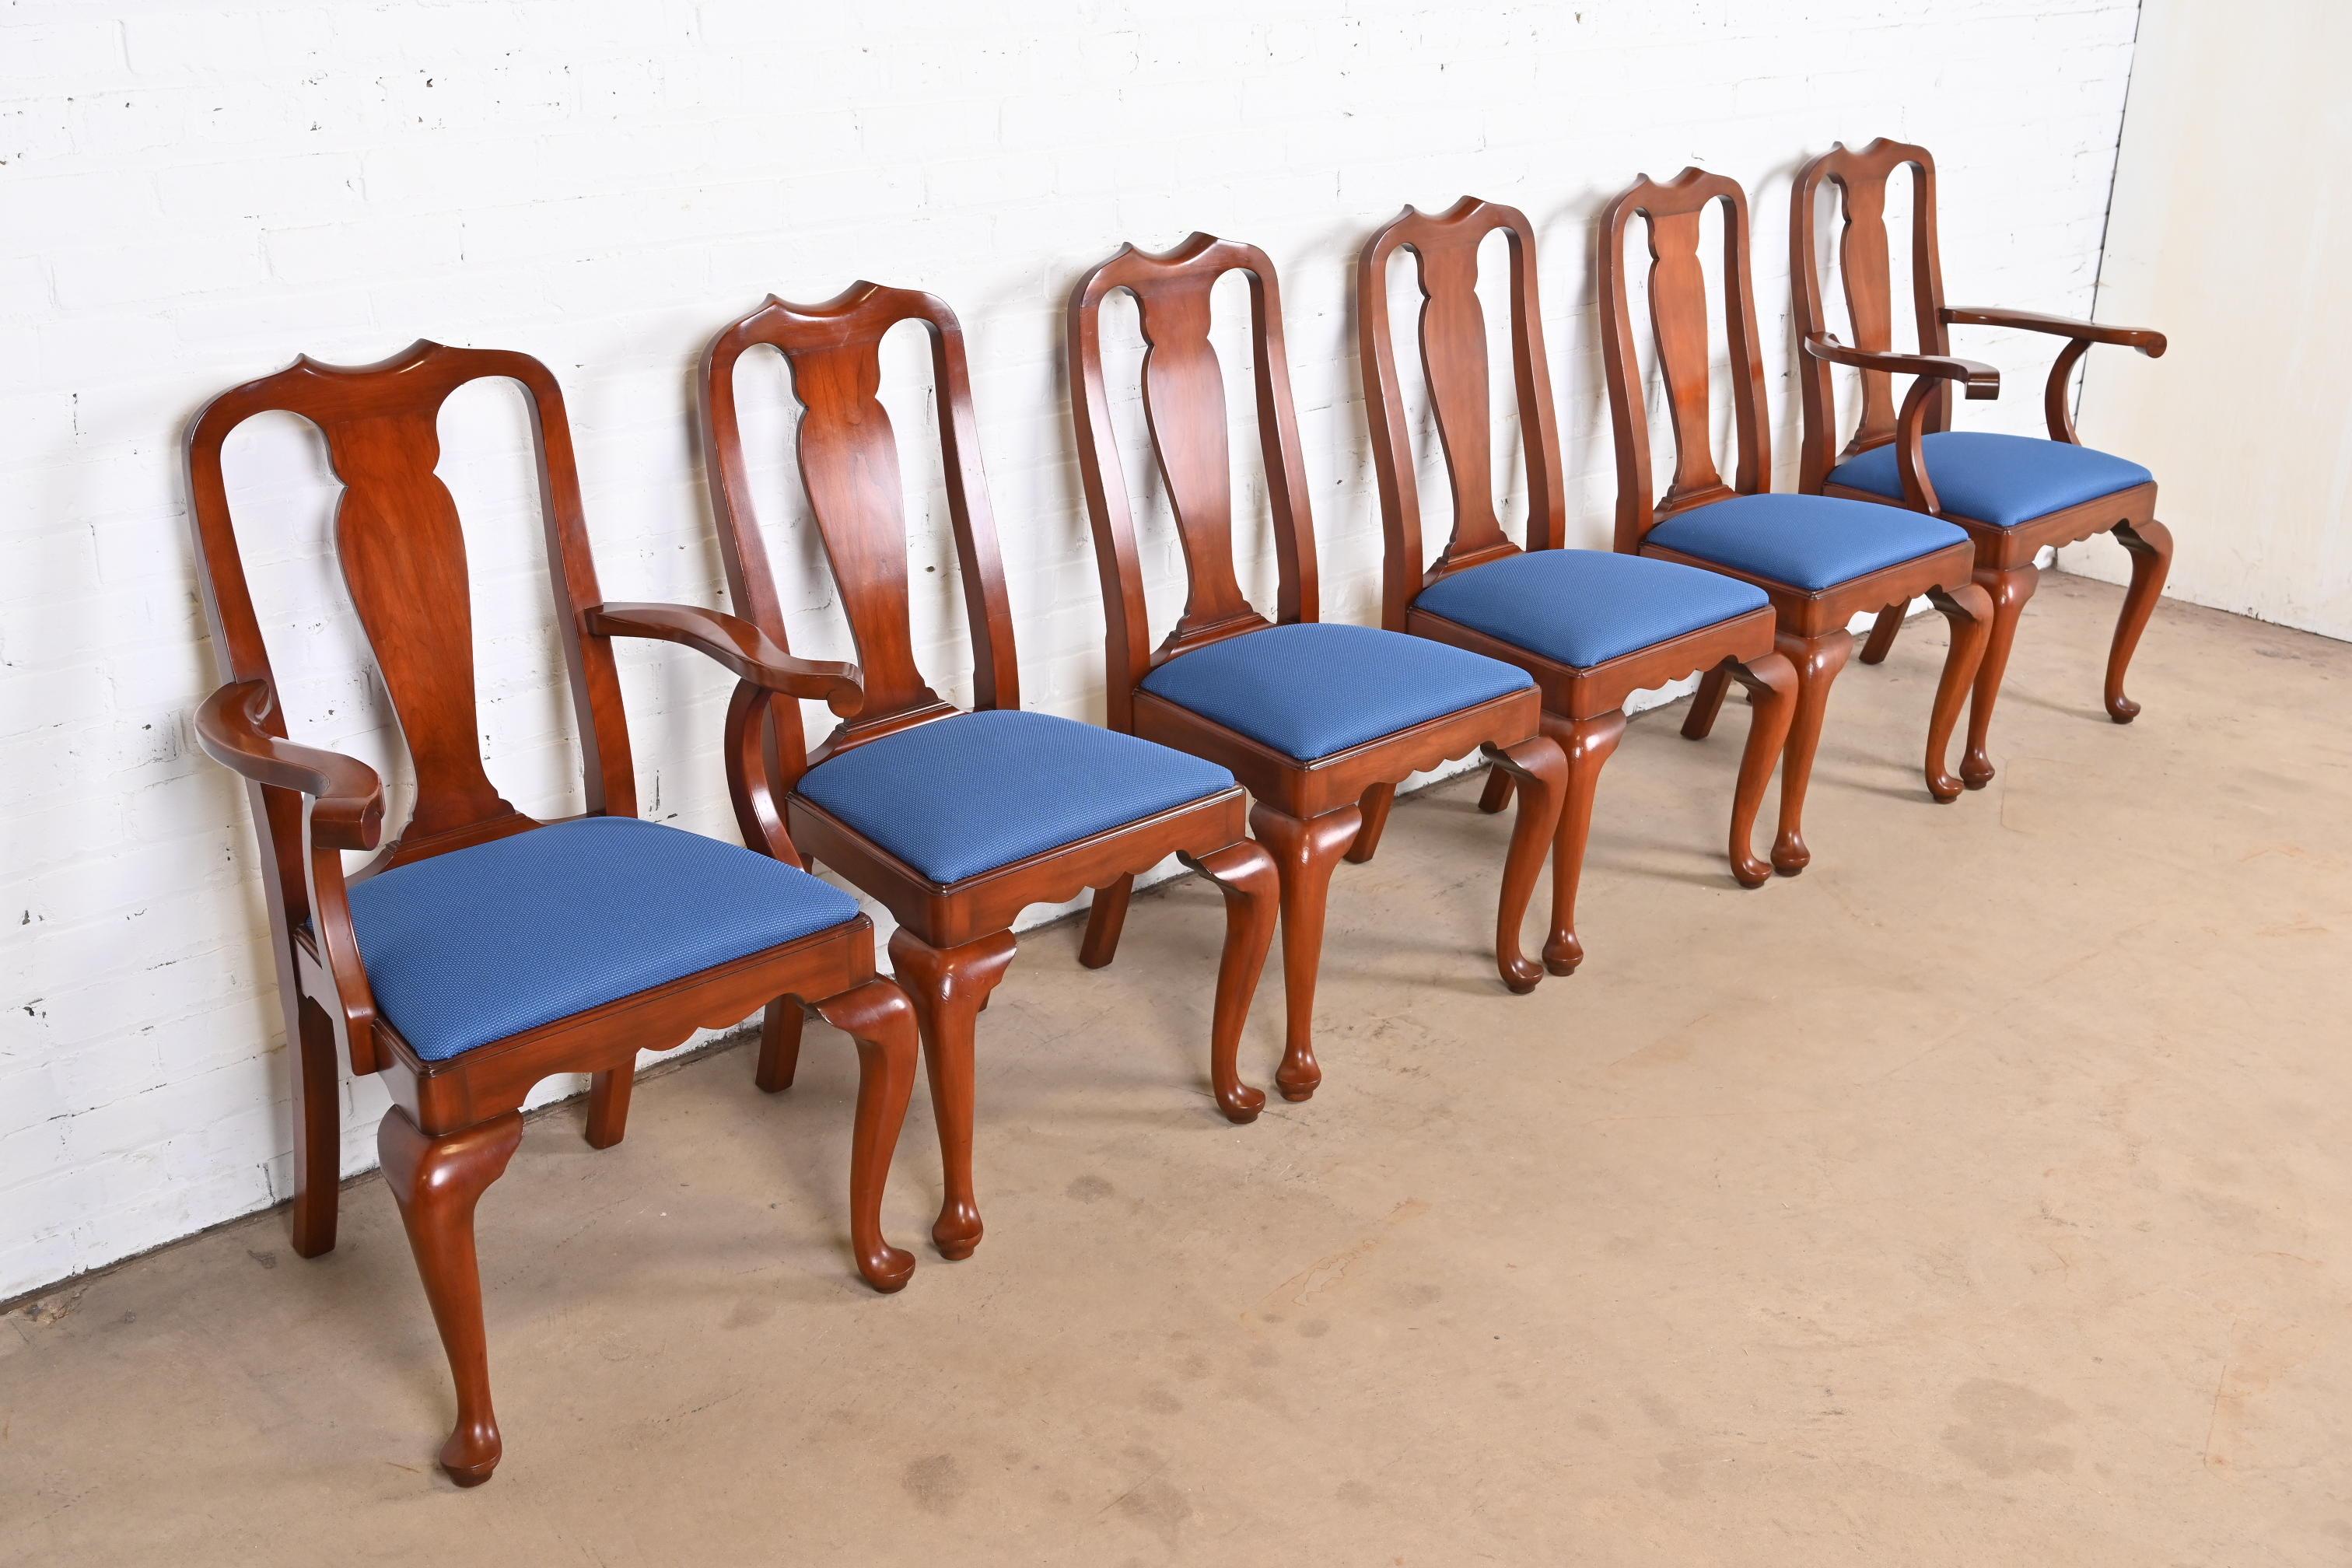 20th Century Henkel Harris Queen Anne Solid Cherry Wood Dining Chairs, Set of Six For Sale